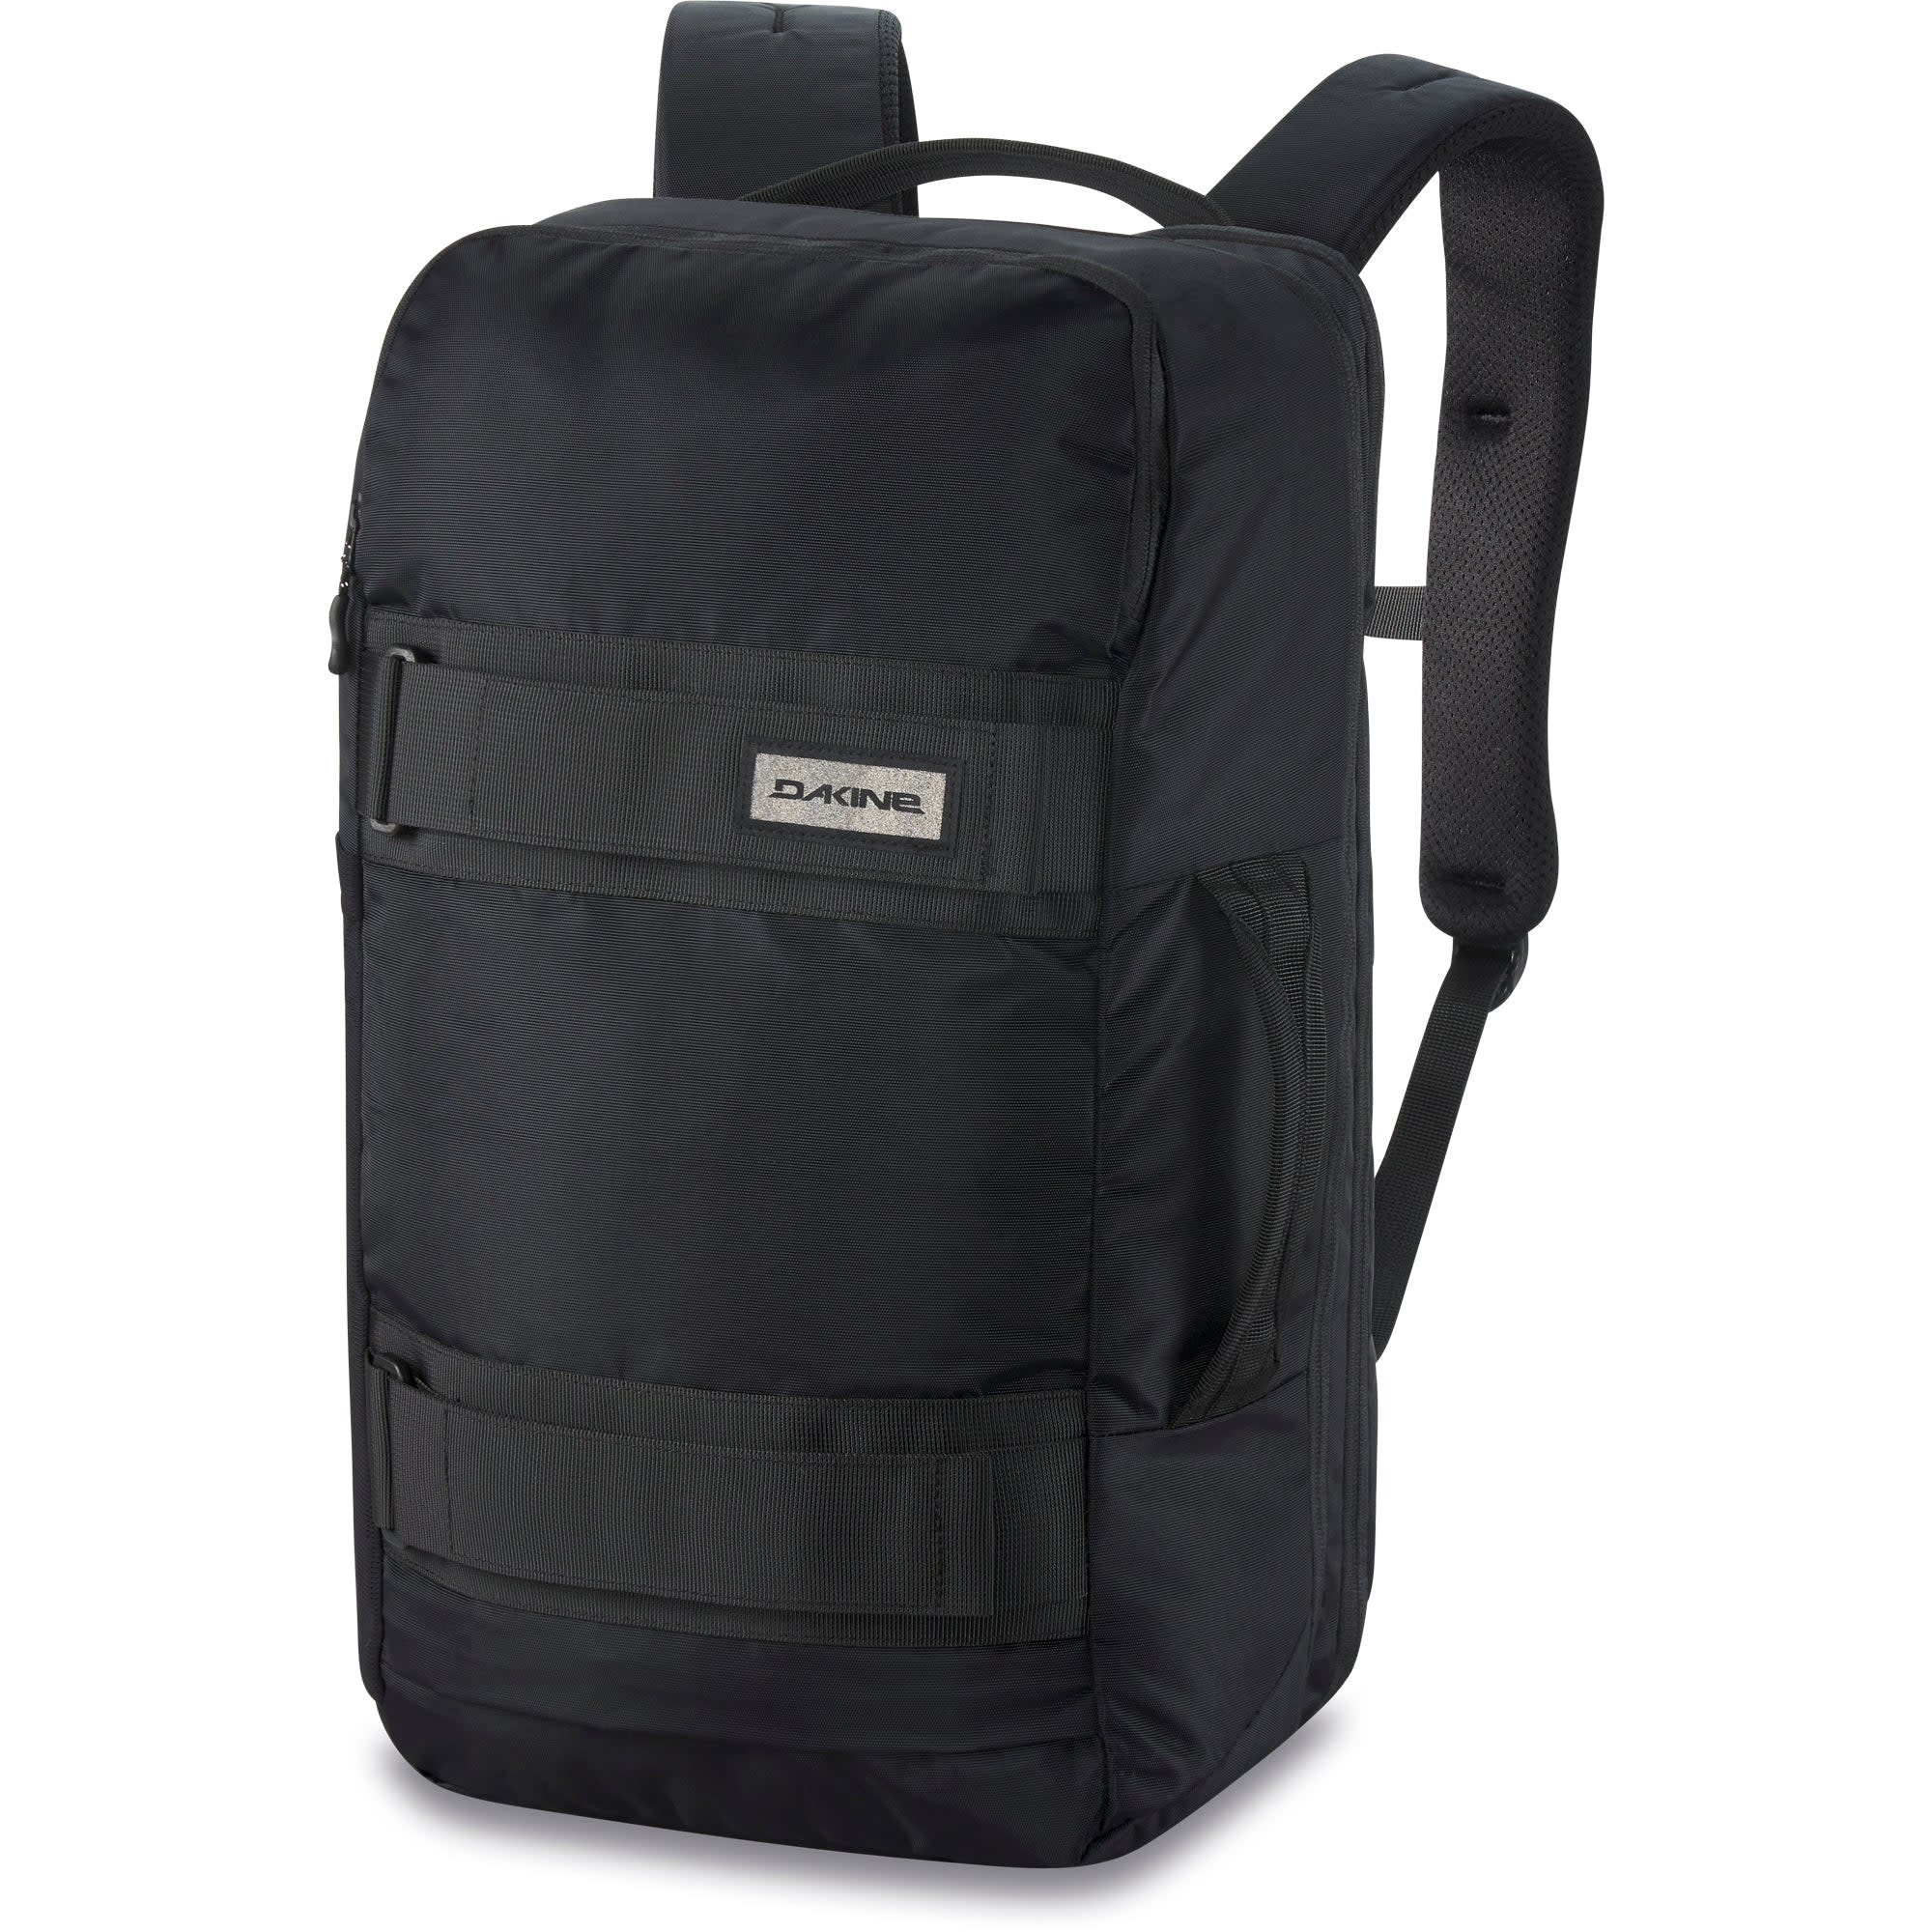 Dakine Mission Street Pack DLX 32L Backpack - Outtabounds